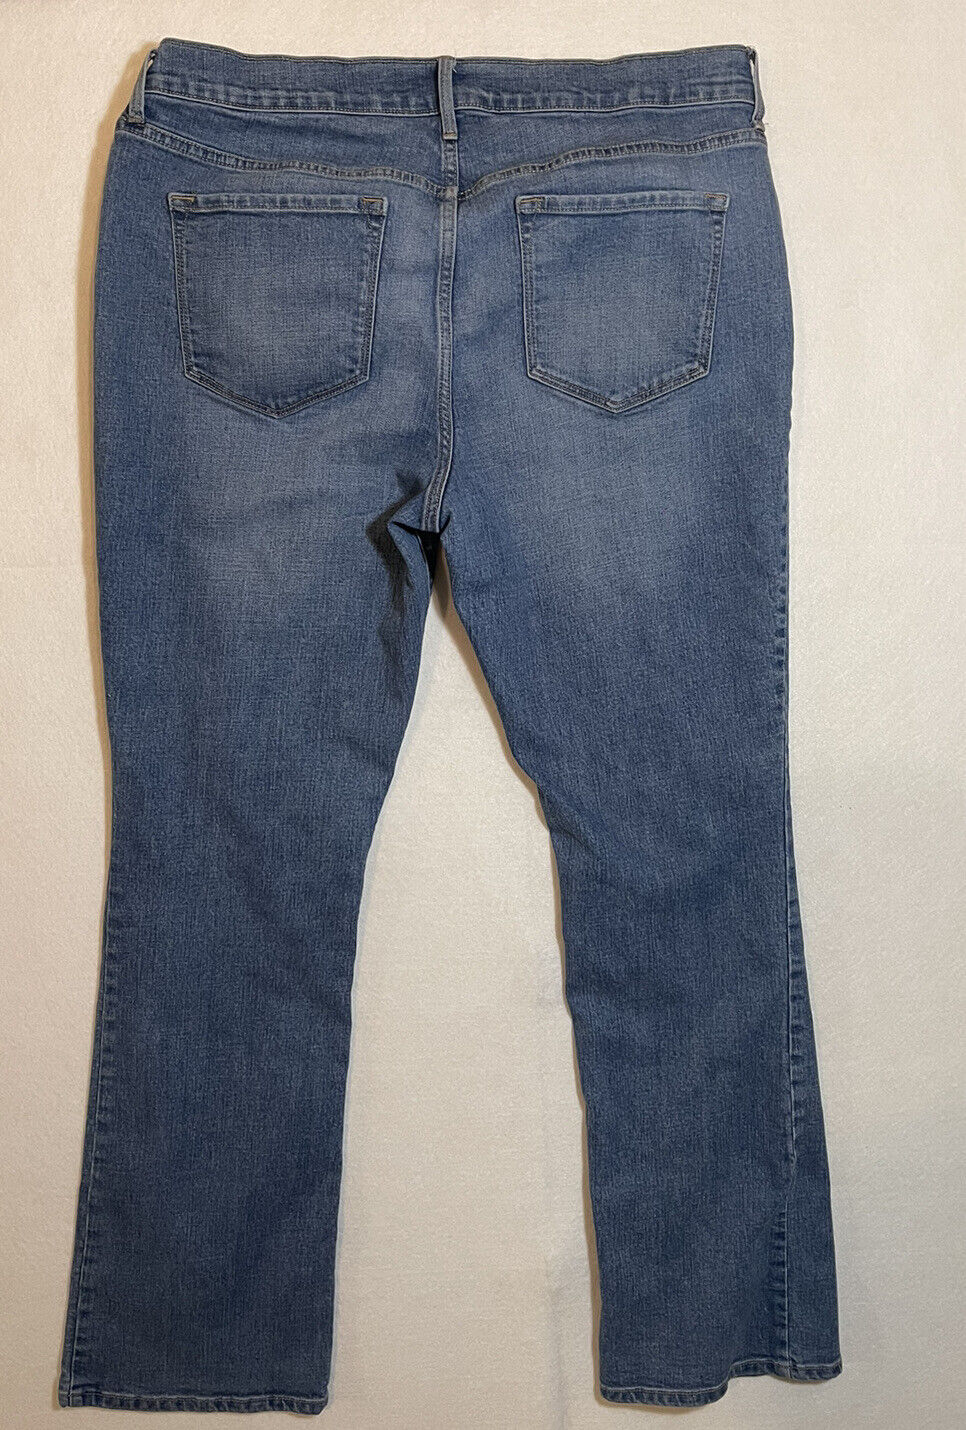 Old Navy Original Mid Rise Bootcut Womens Jean Si… - image 2